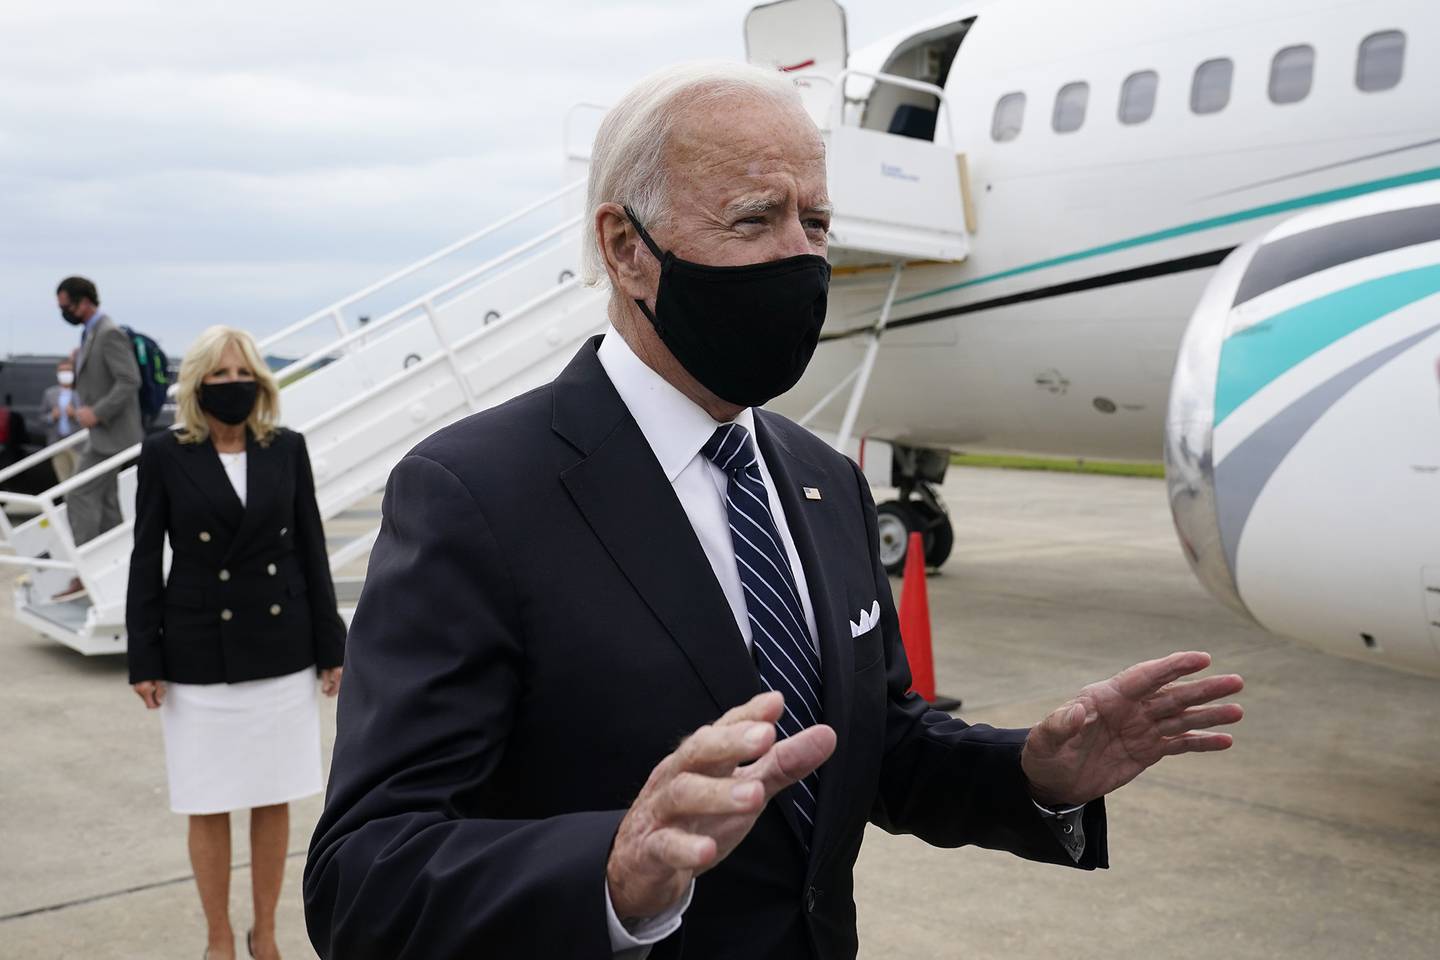 Democratic presidential candidate and former Vice President Joe Biden speaks with reporters after he and his wife Jill Biden, back left, stepped off a plane at New Castle Airport in New Castle, Del., Friday, Sept. 11, 2020.